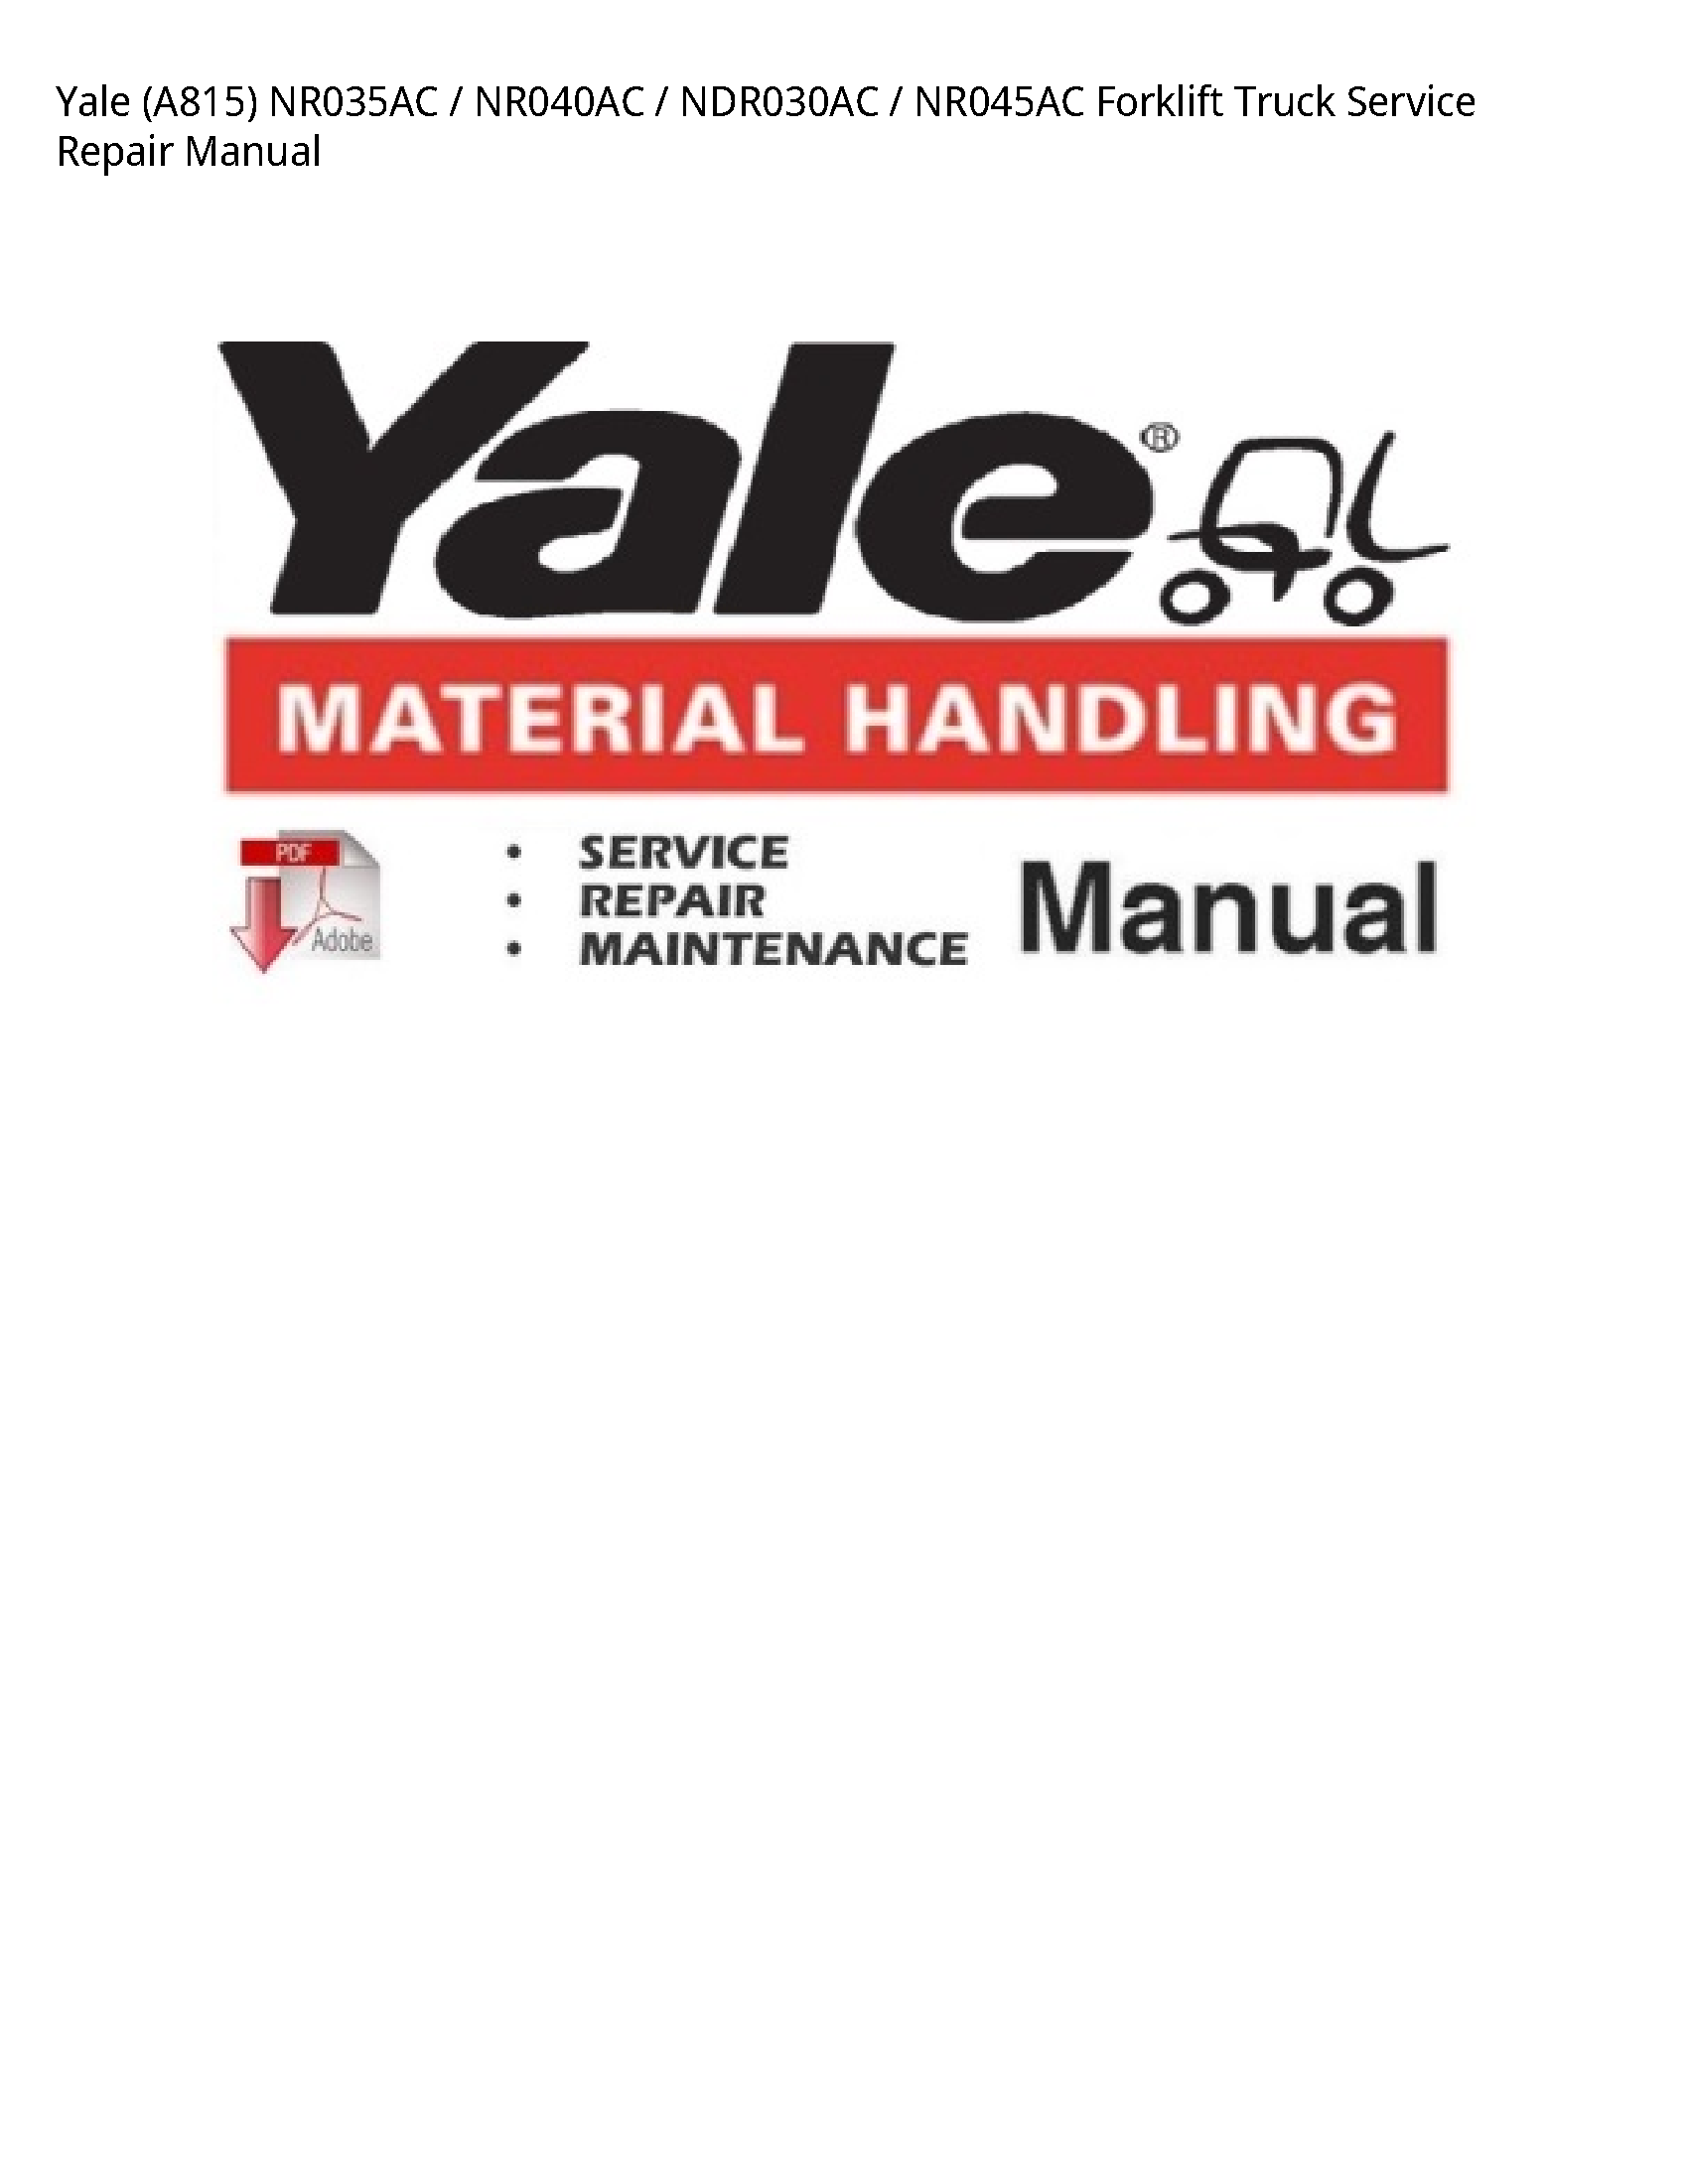 Yale (A815) Forklift Truck manual